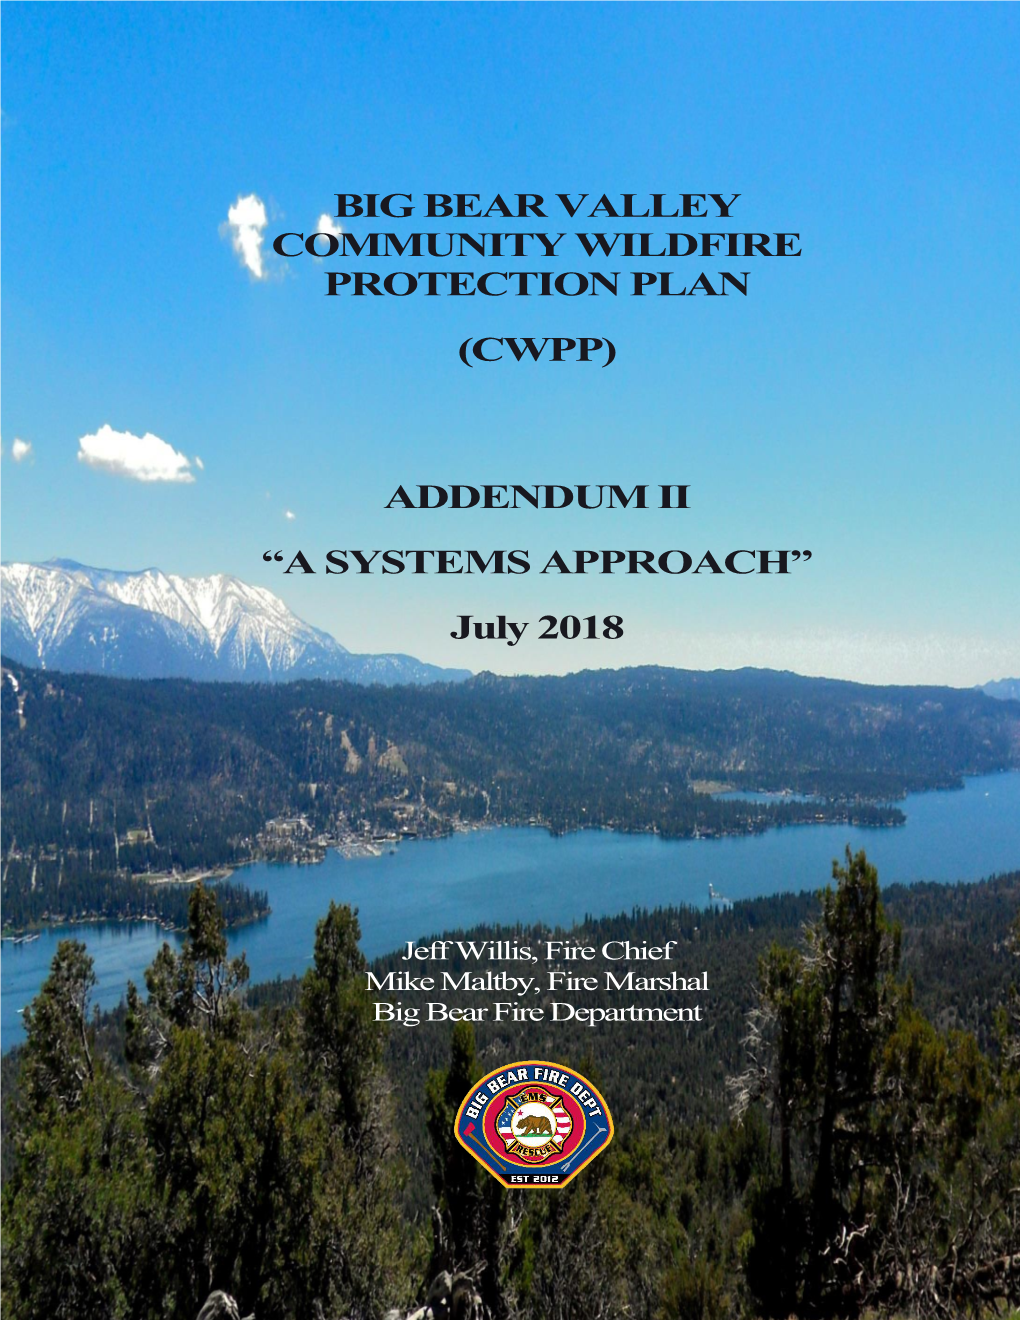 BIG BEAR VALLEY COMMUNITY WILDFIRE PROTECTION PLAN (CWPP) ADDENDUM II “A SYSTEMS APPROACH” July 2018